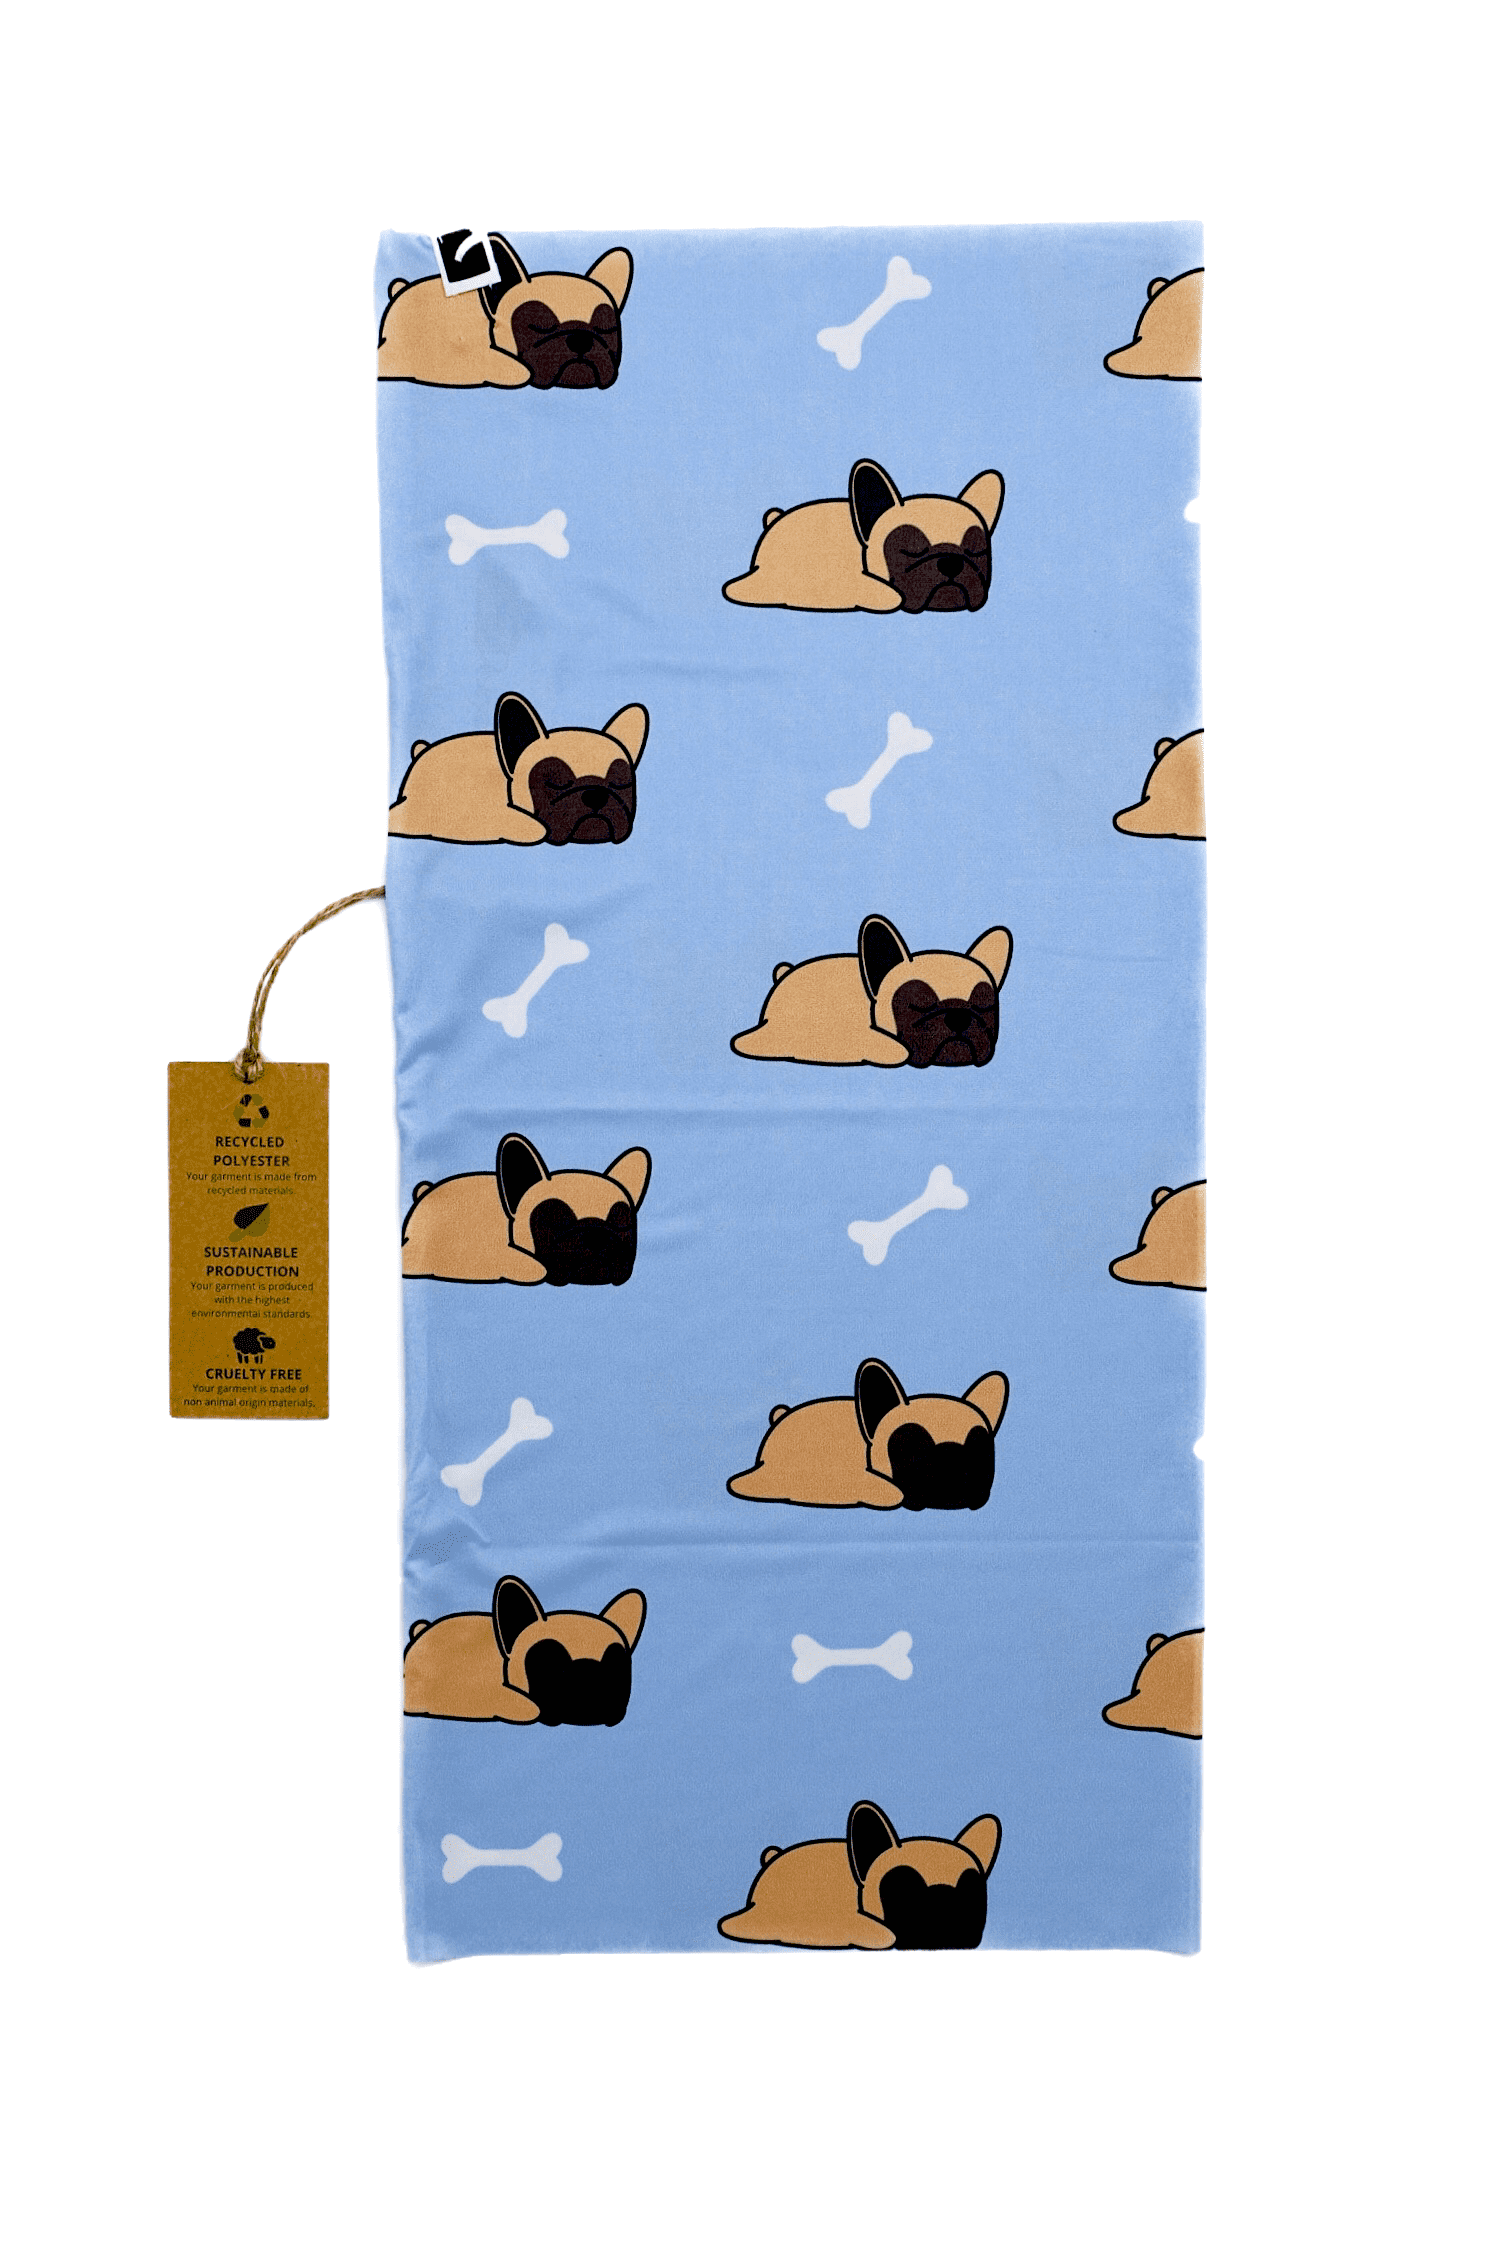 This is a unisex, multifunctional and sustainable bandana with a French Bulldog print in light blue. It is made from recycled polyester which is breathable, durable, soft to touch, easy to care and fast drying material. It makes it perfectly suitable for all kinds of sports like biking, hiking, jogging or skiing. This is a versatile bandana that can be used as a scarf, face mask, bandana or headband and it is also known as tube scarf, neck gaiter or face mask. It is a vegan product certified by PETA.